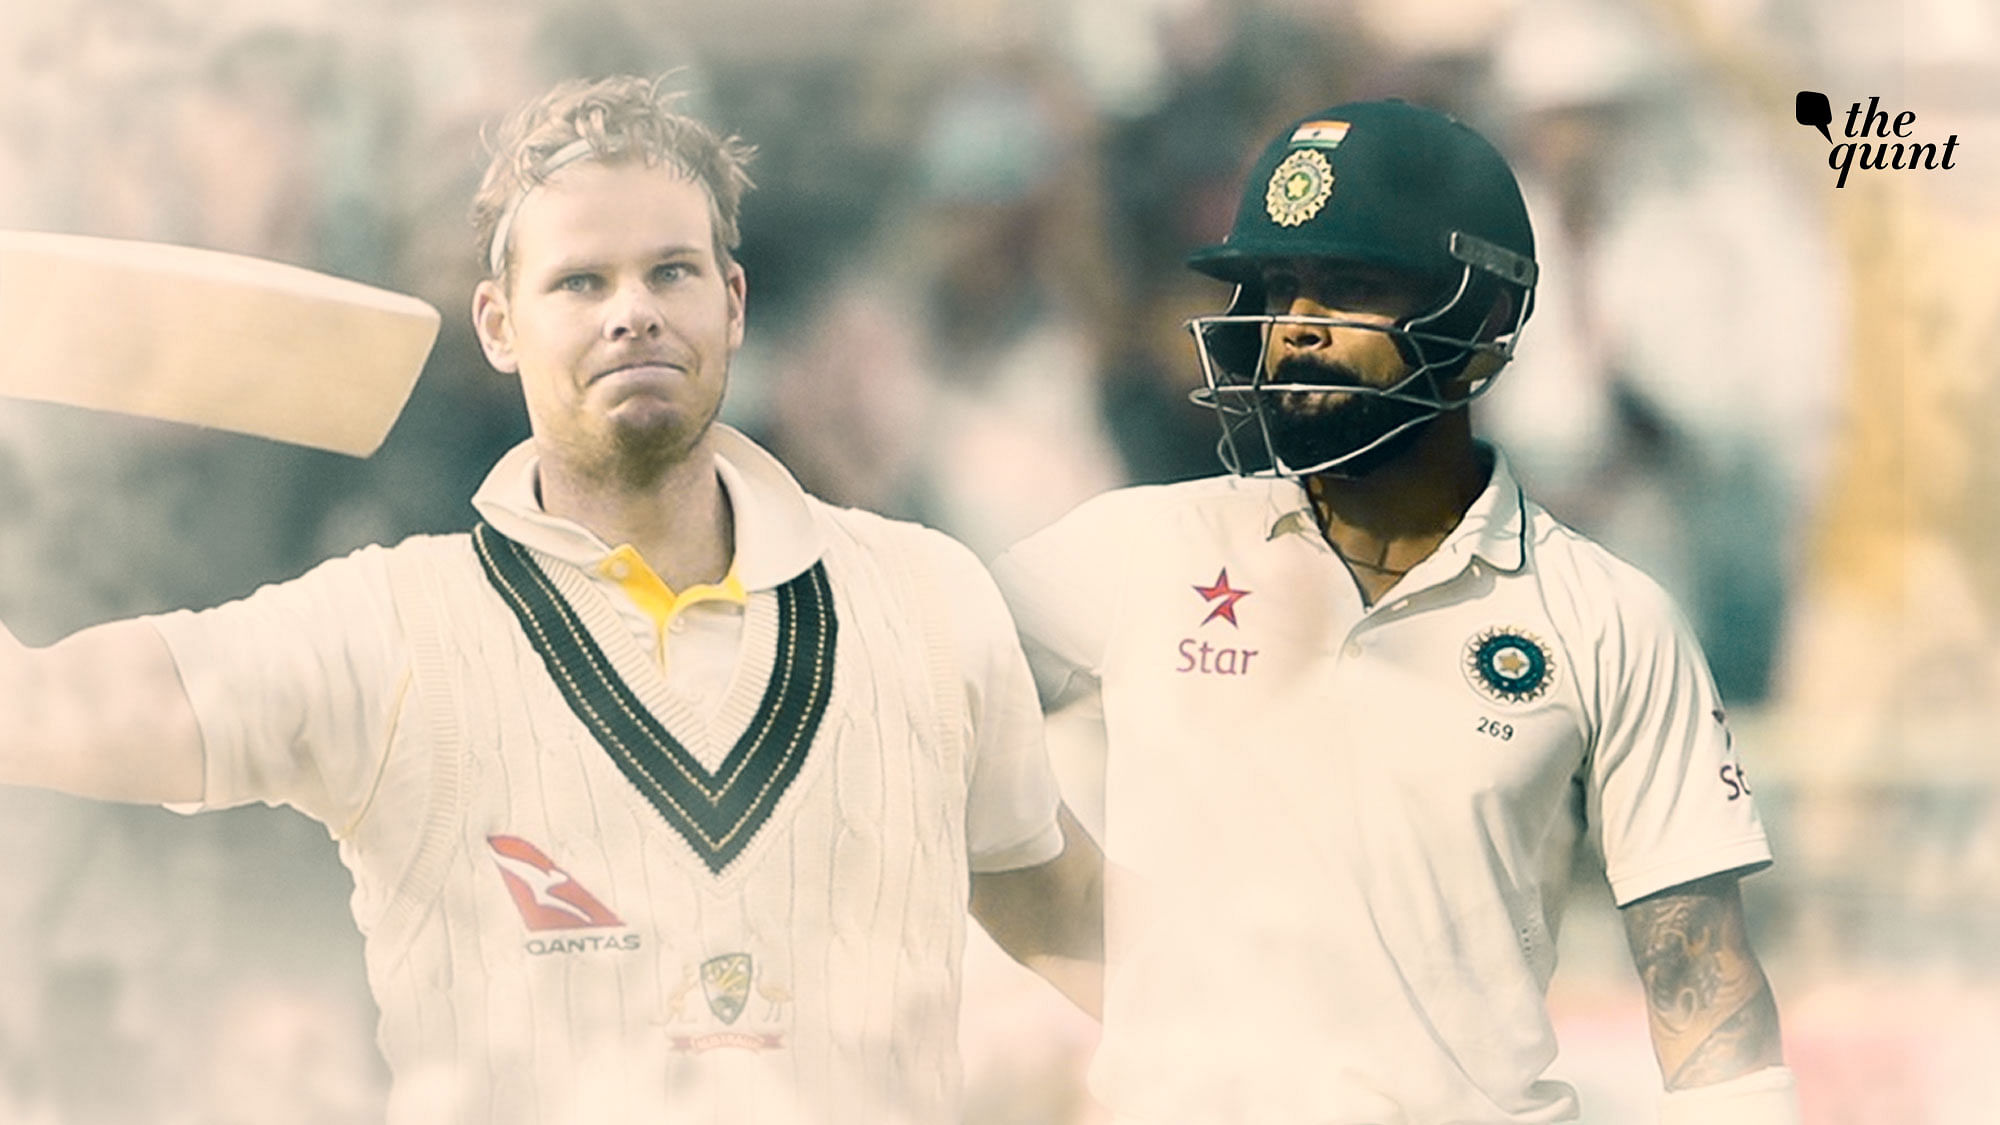 Steve Smith has overtaken Virat Kohli as the number one Test cricketer in the latest ICC rankings.